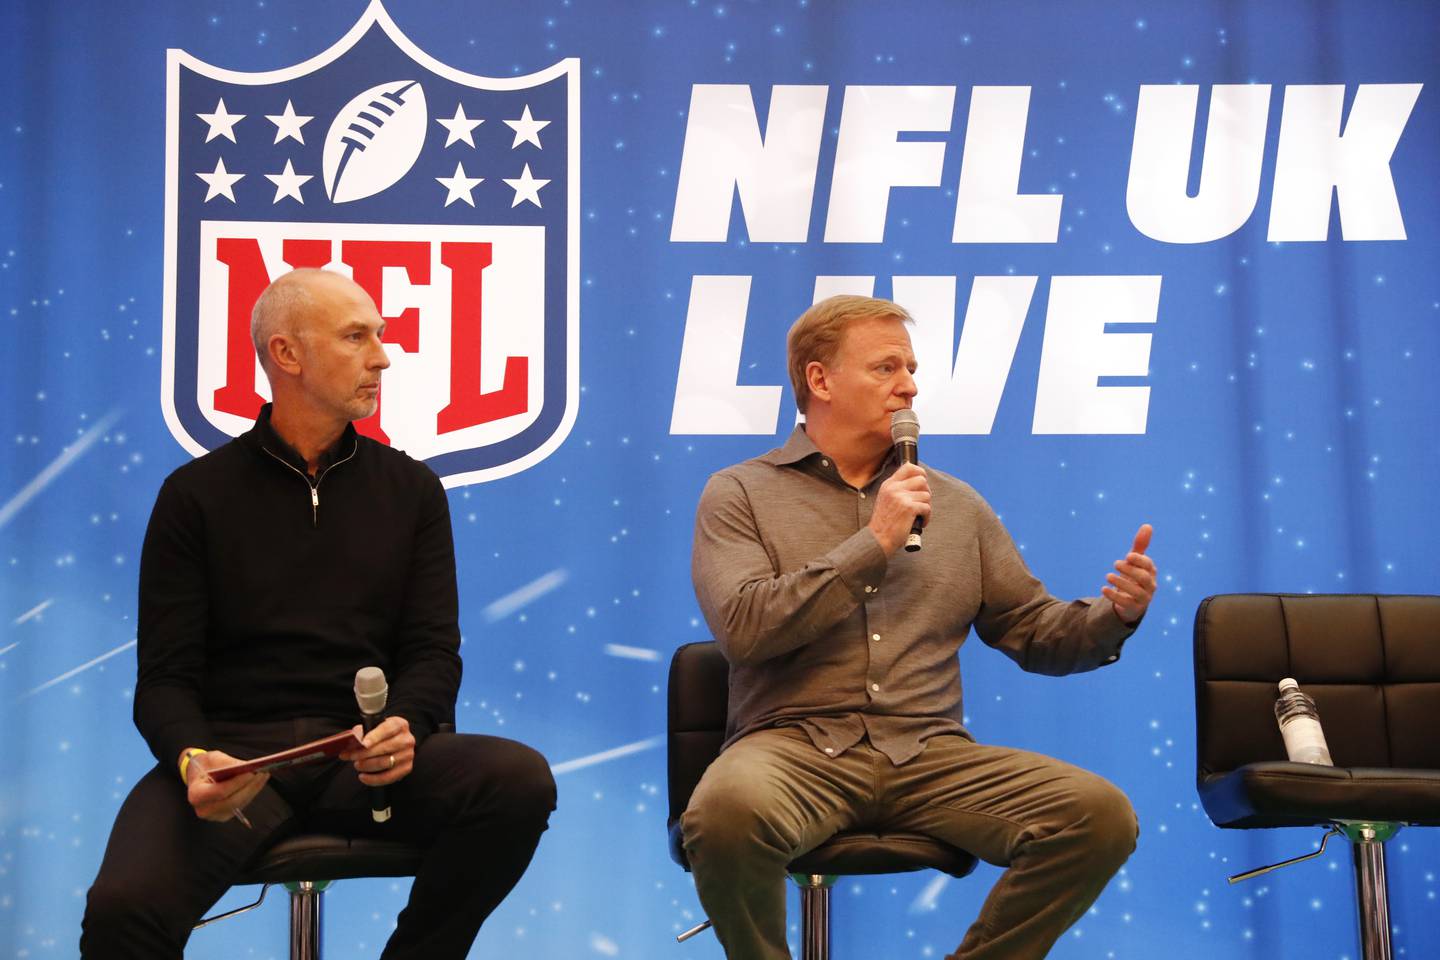 NFL commish Roger Goodell, seen here with Sky Sports NFL broadcaster Neil Reynolds (l.), has big plans for the league in London.